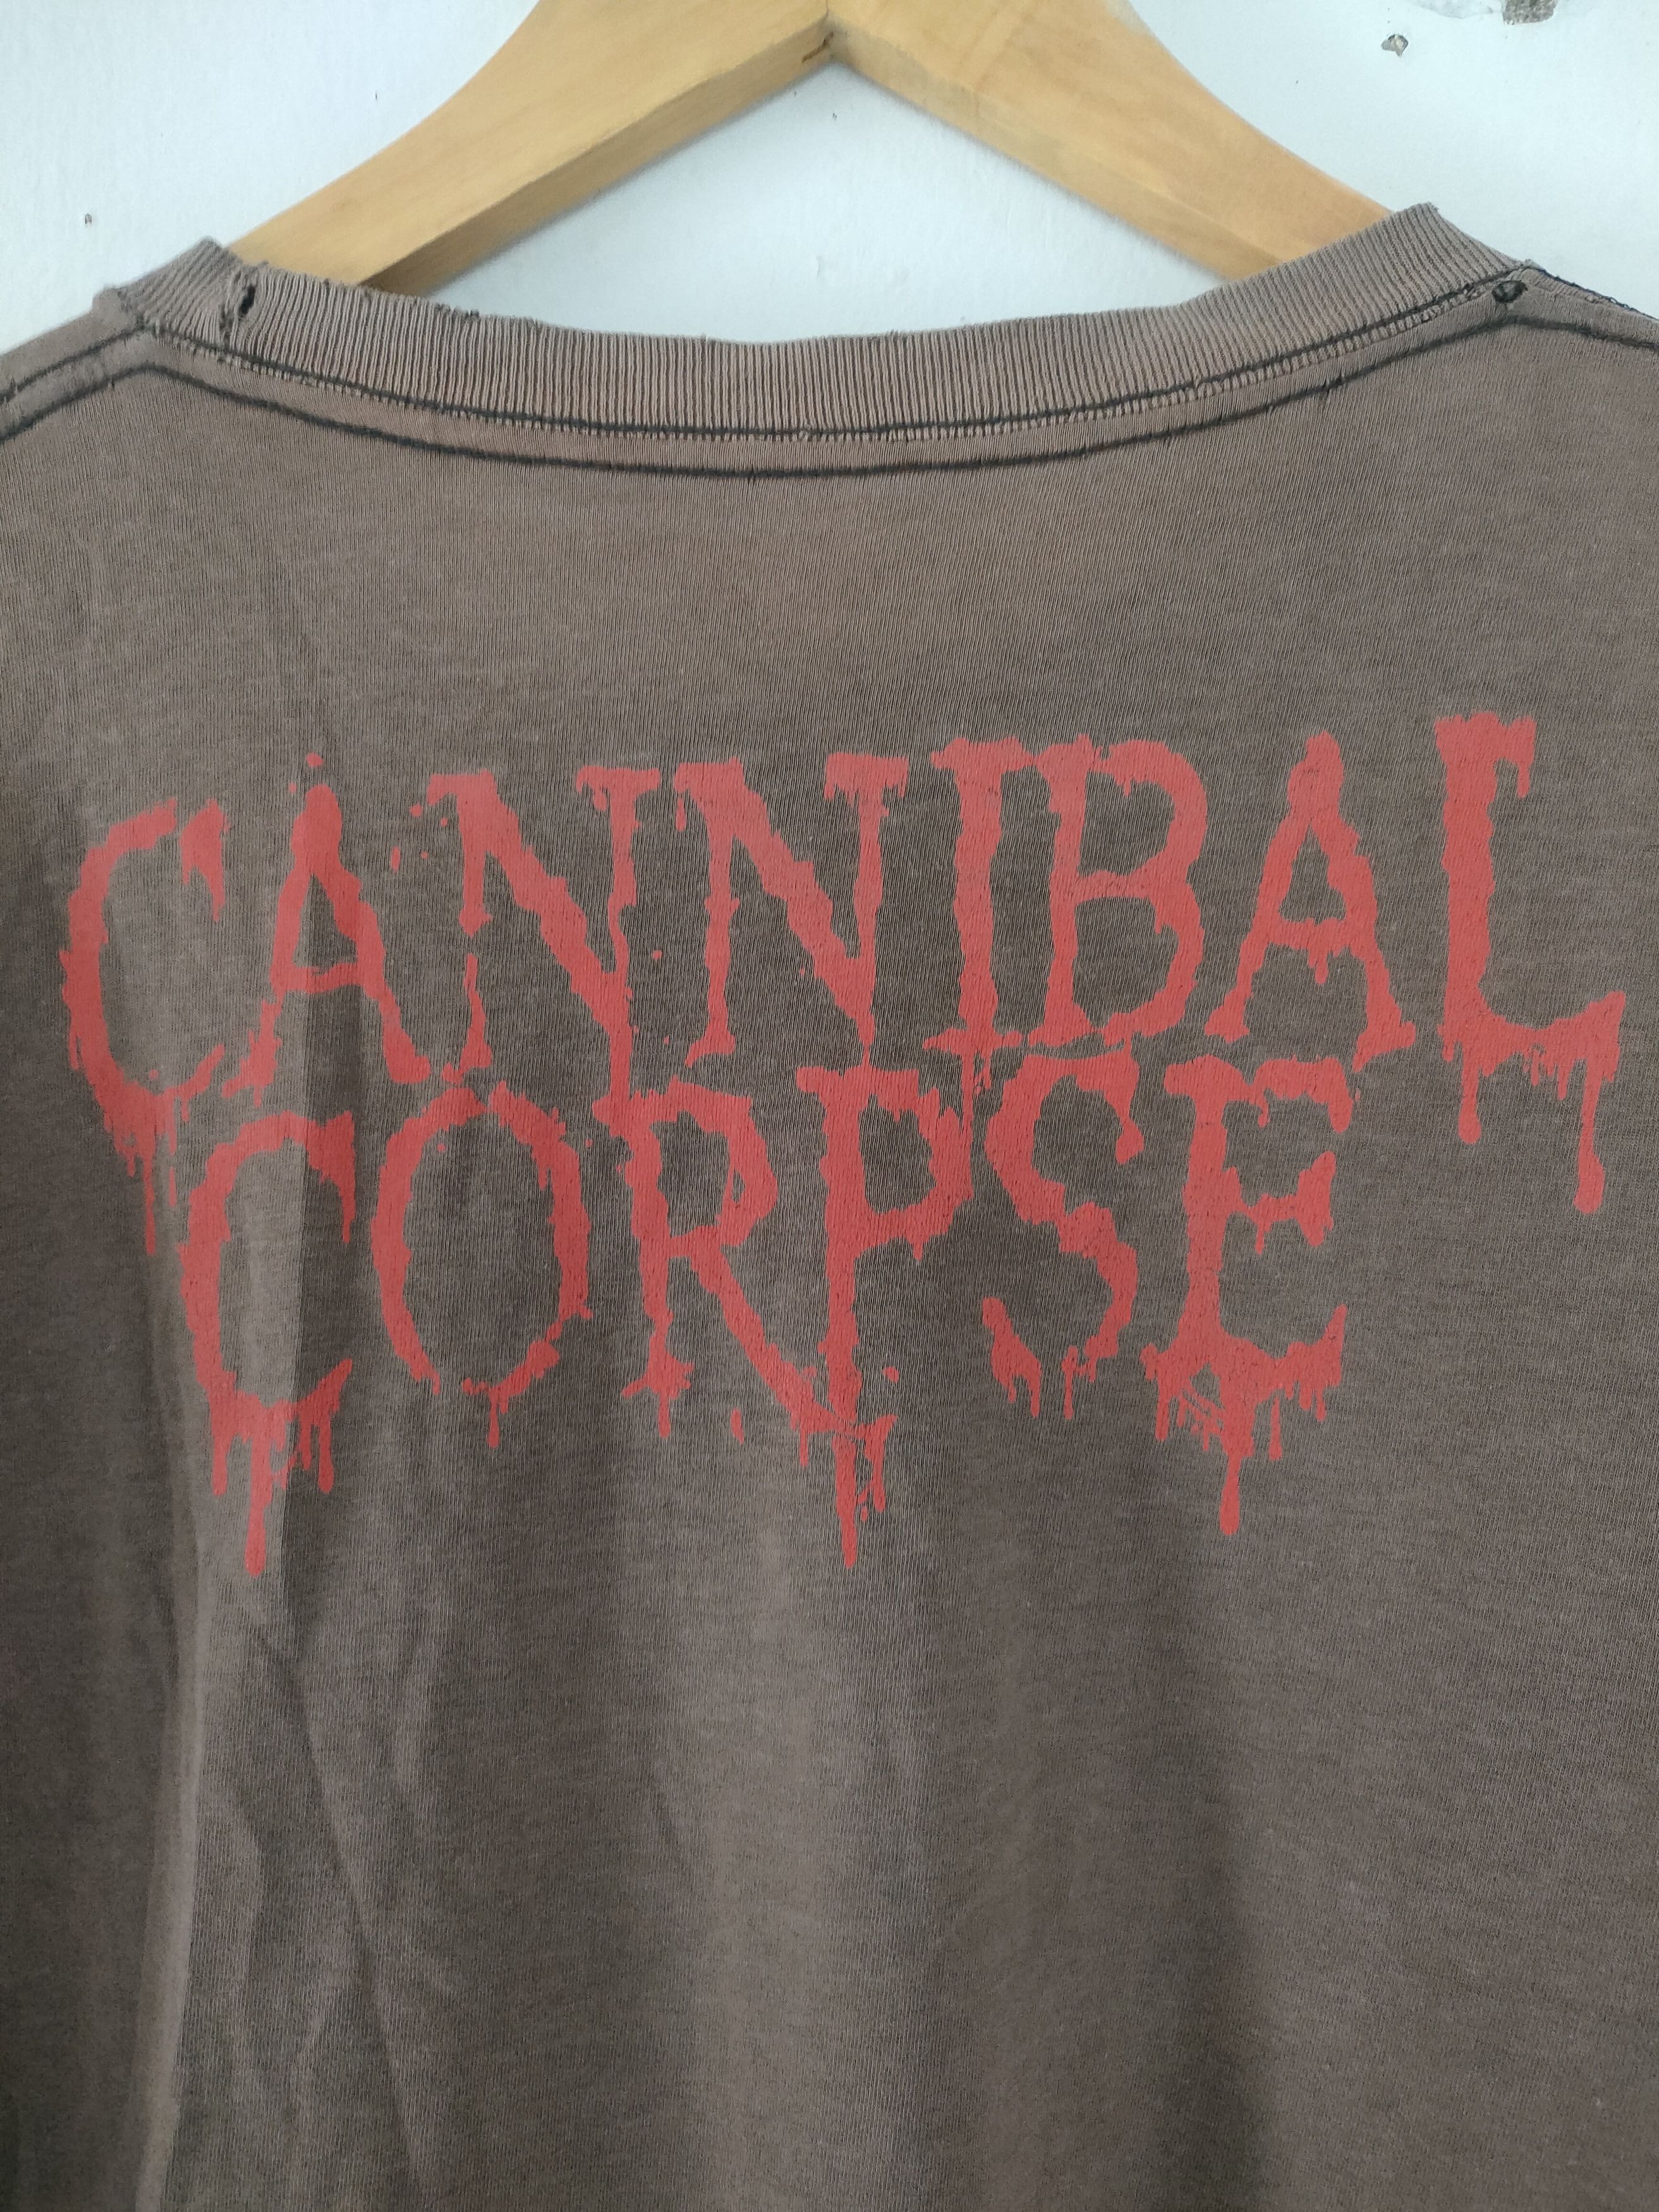 CANNIBAL CORPSE VINTAGE SHIRT THE WRETCHED SPAWN - 3